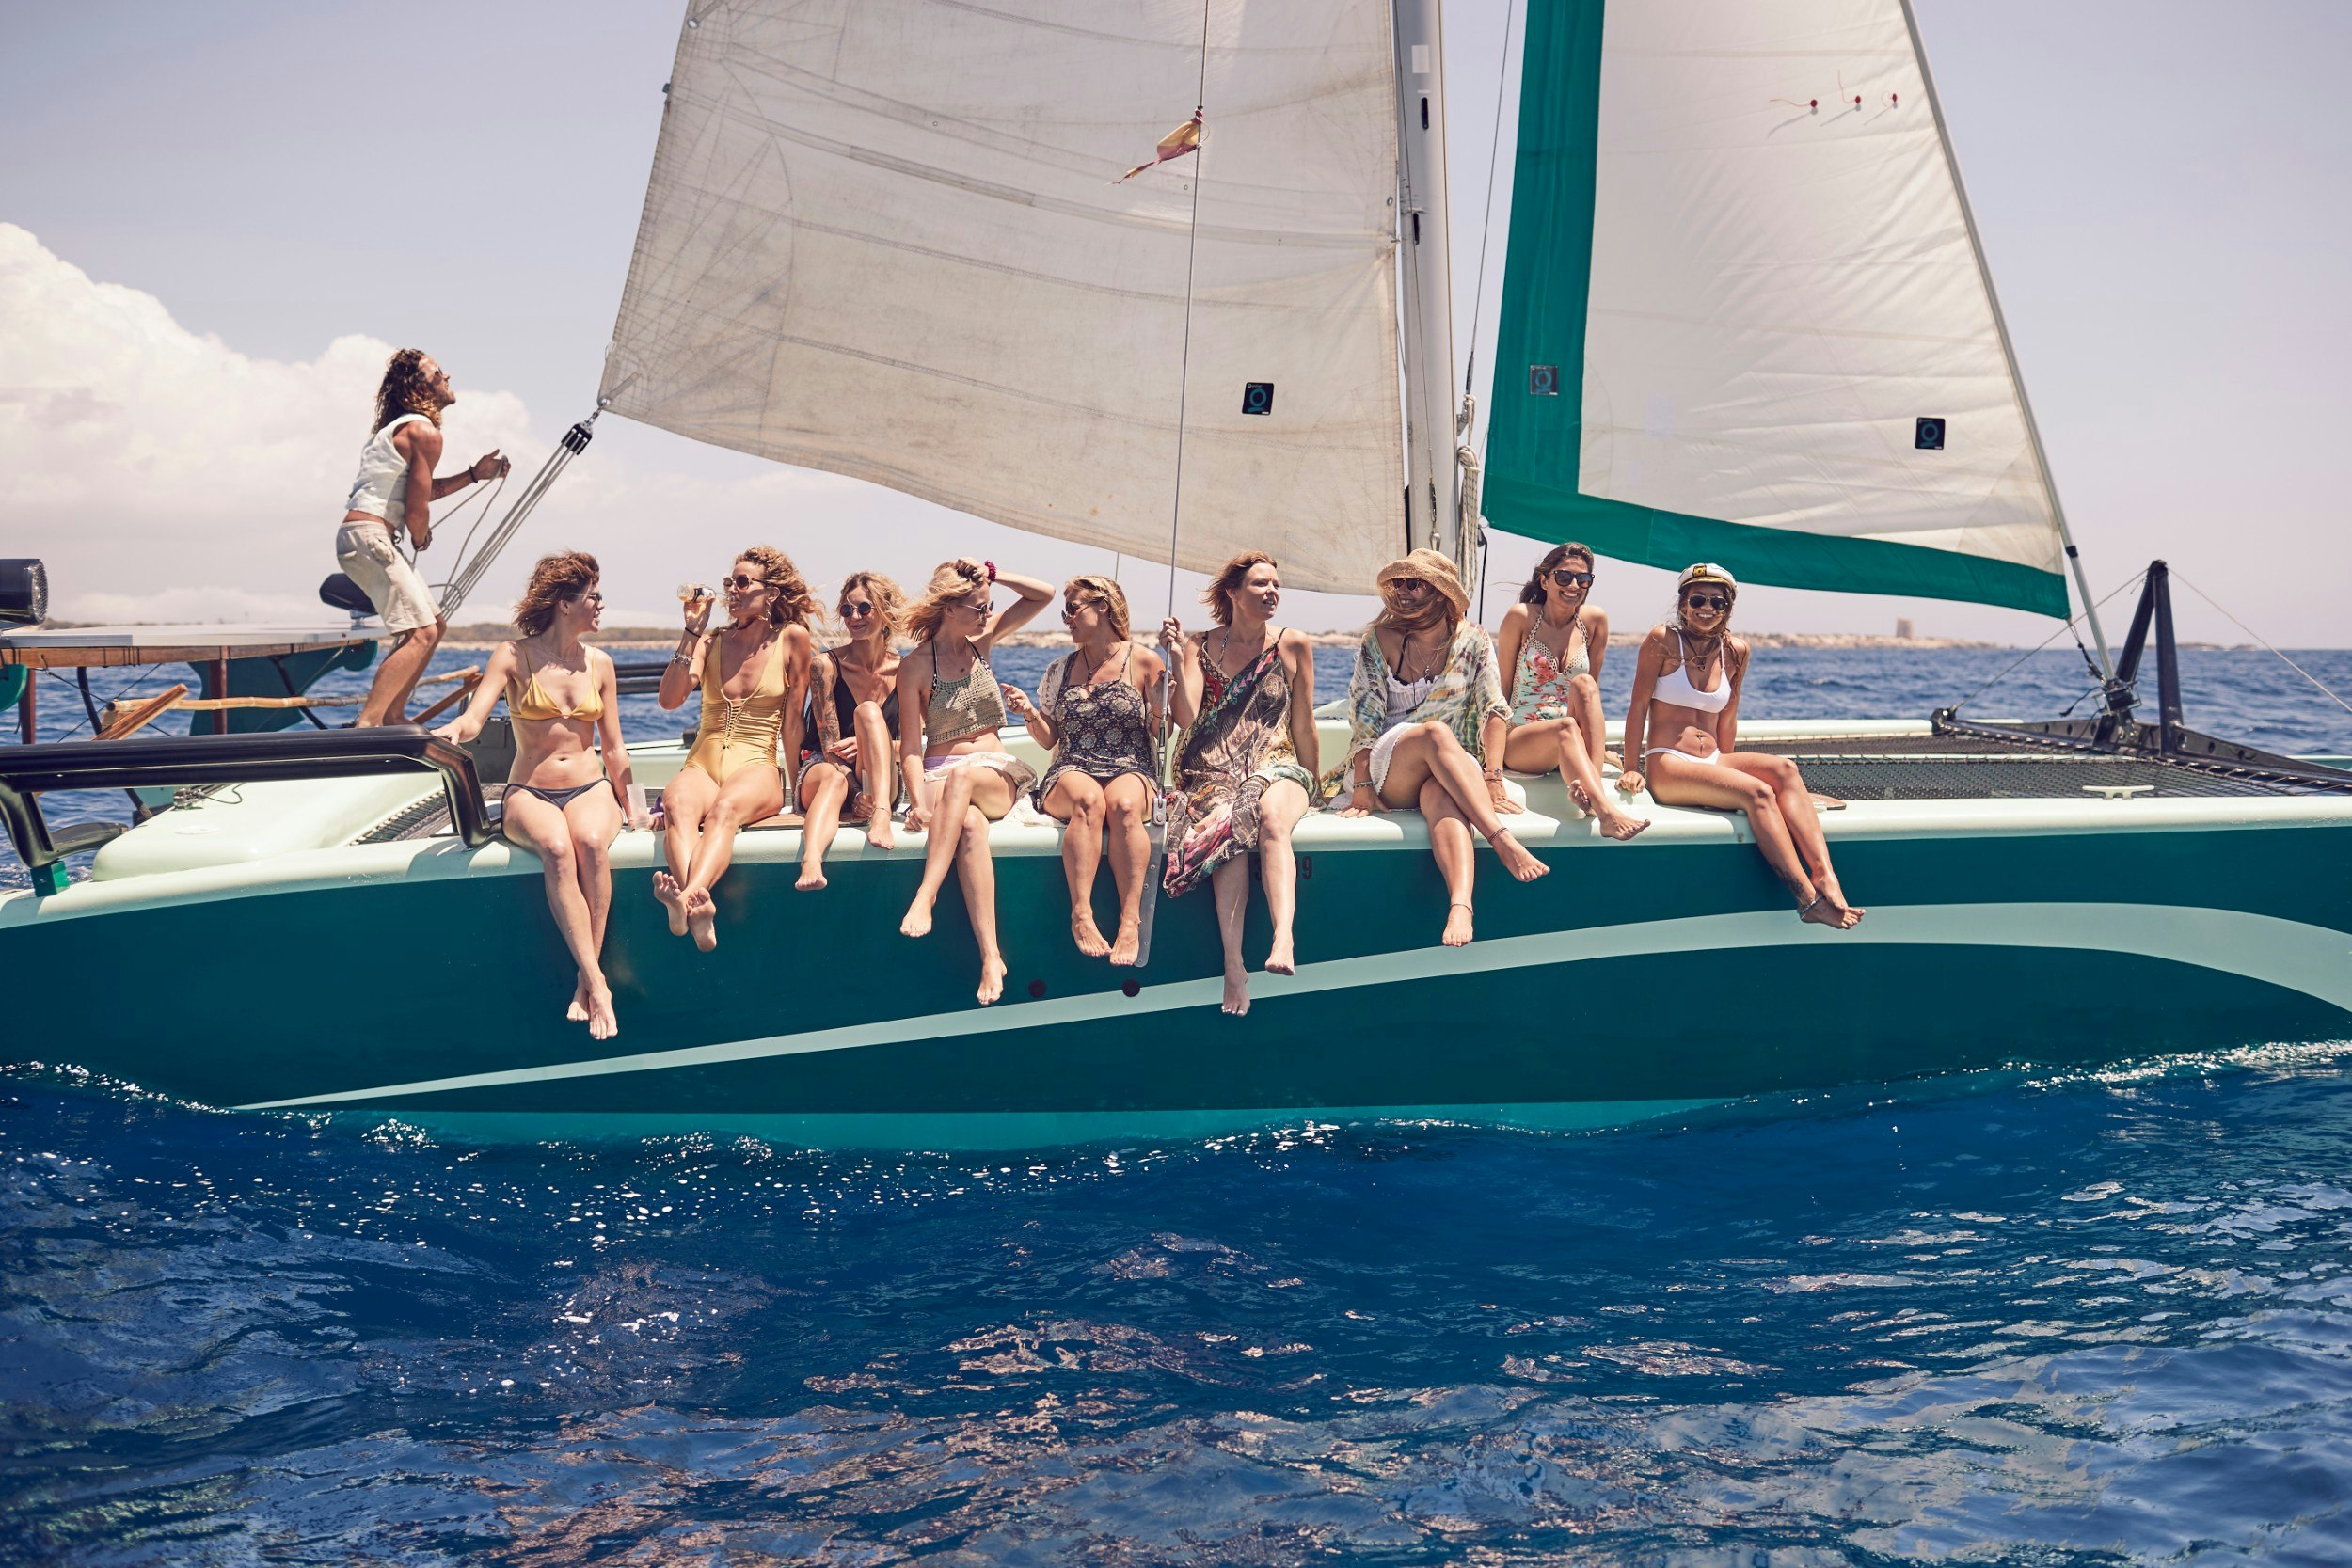 Nine women sitting on the side of a catamaran while one man sails it